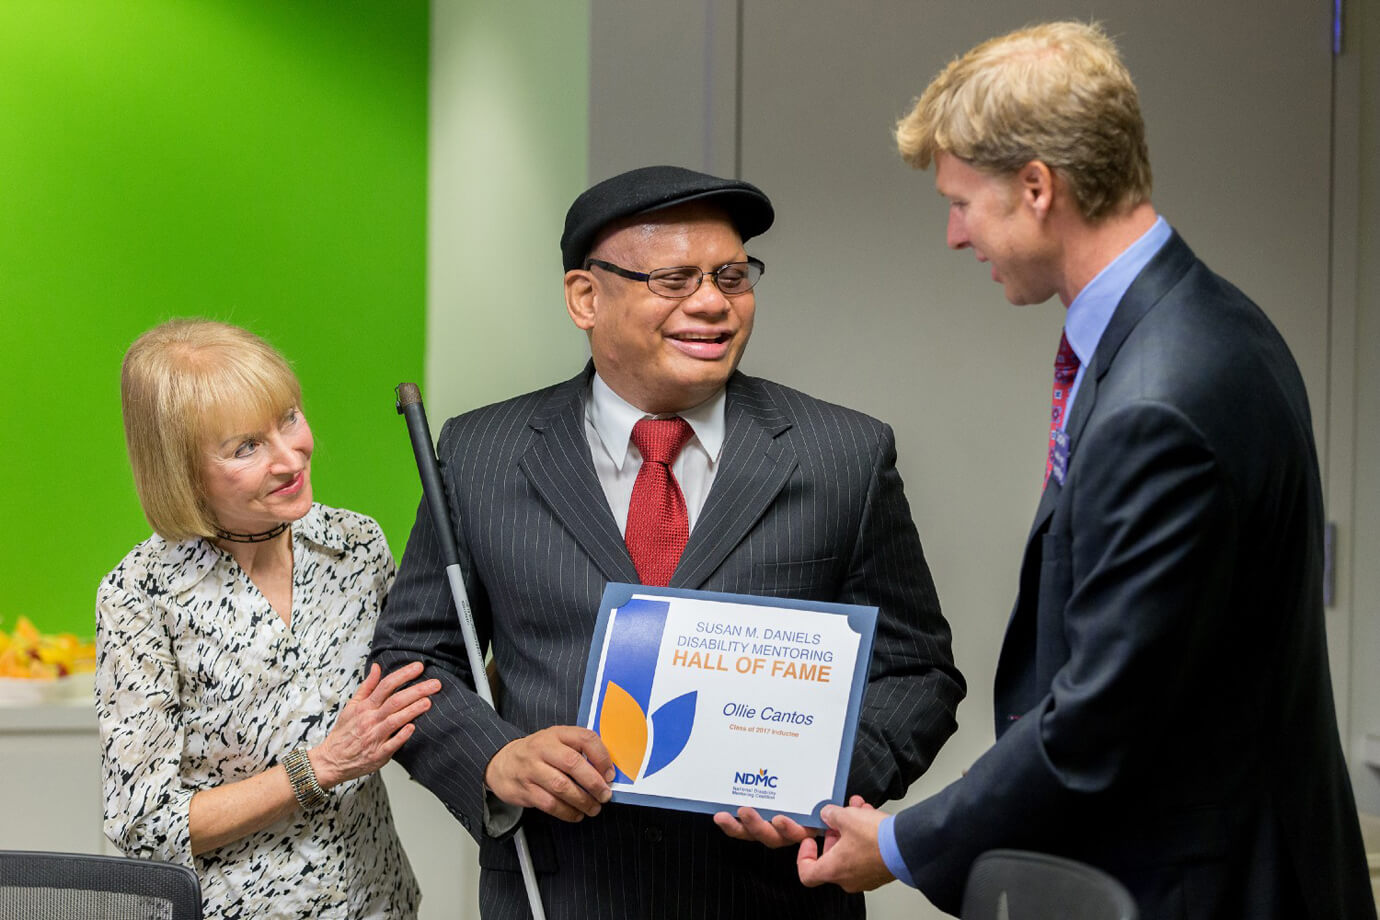 Ollie Cantos accepts his induction into the Disability Mentoring Hall of Fame